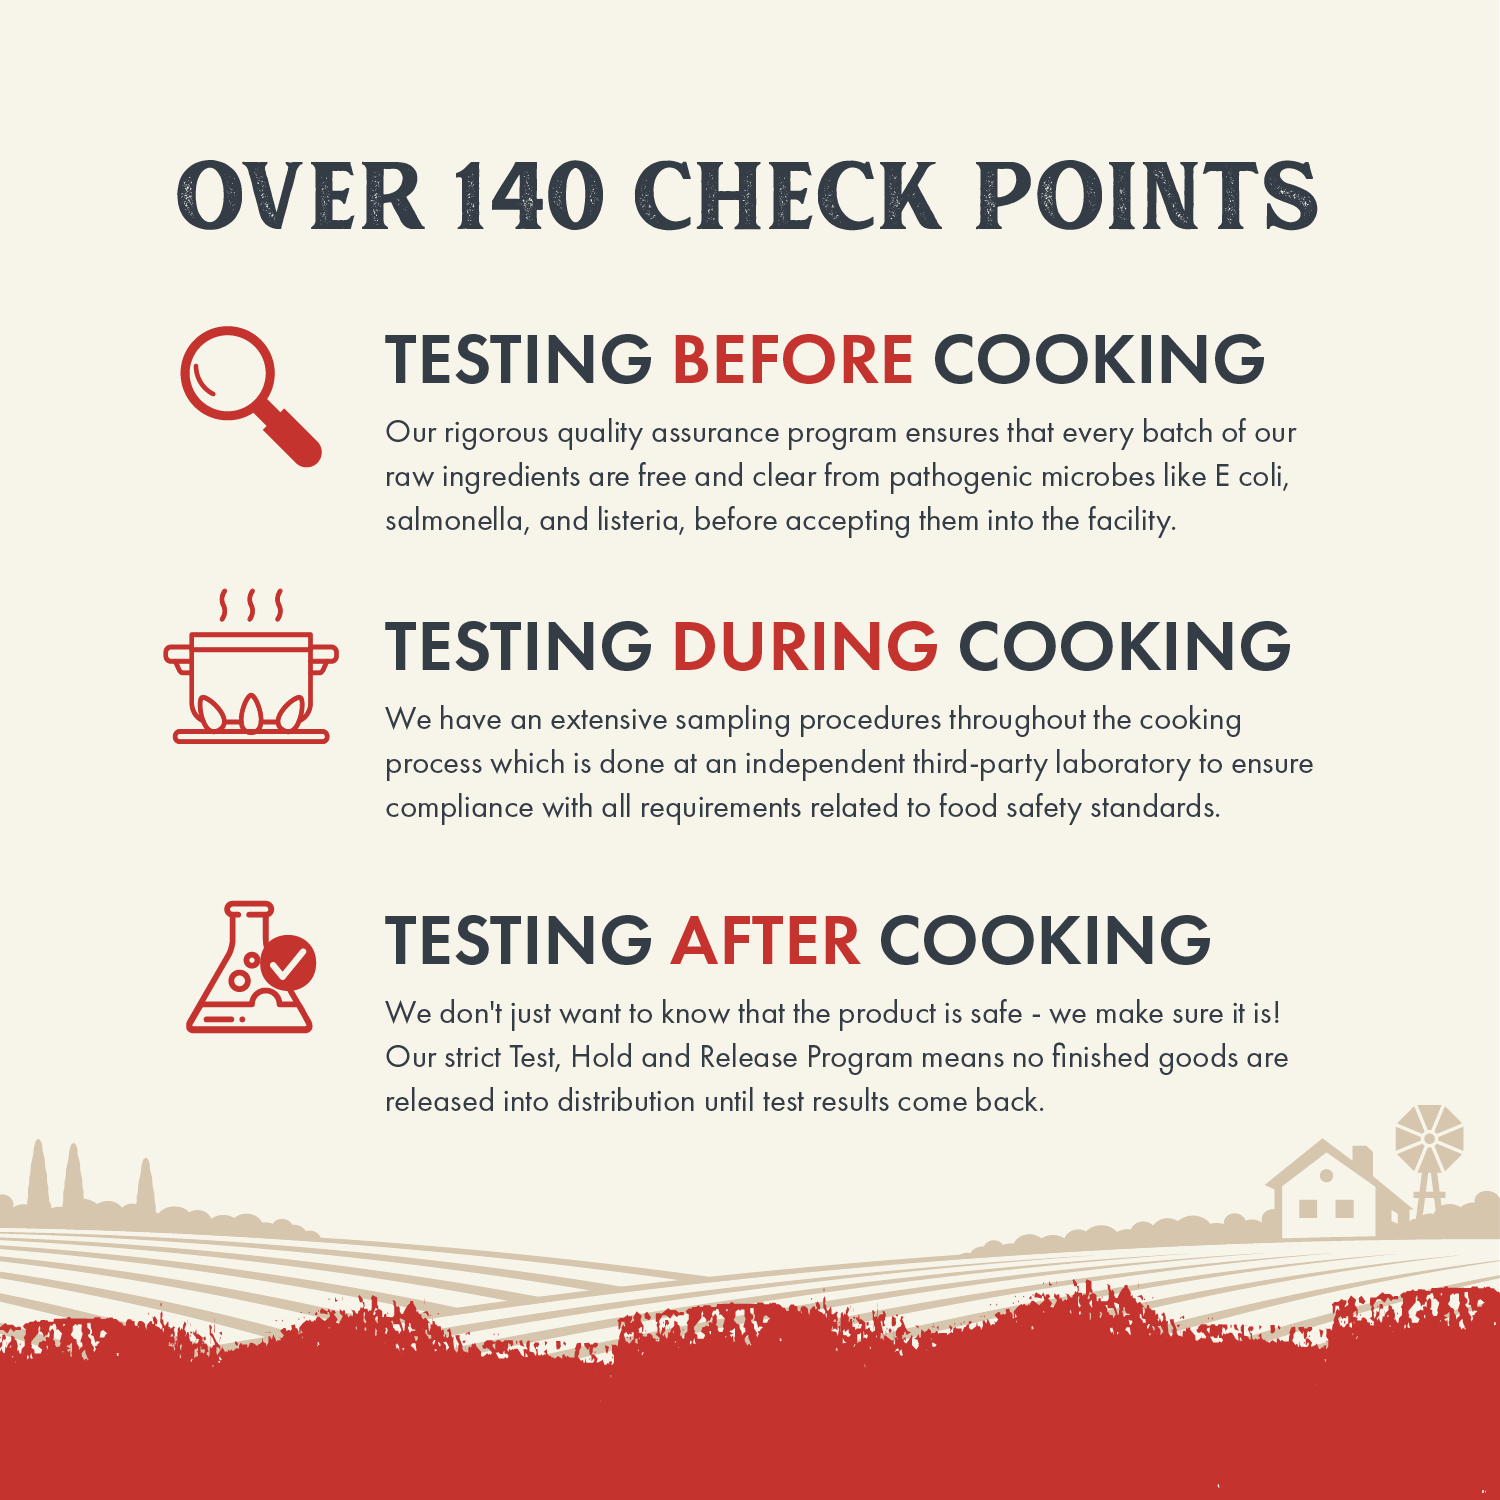 Infographic on Health Extension's safety checks with over 140 checkpoints and thorough testing.